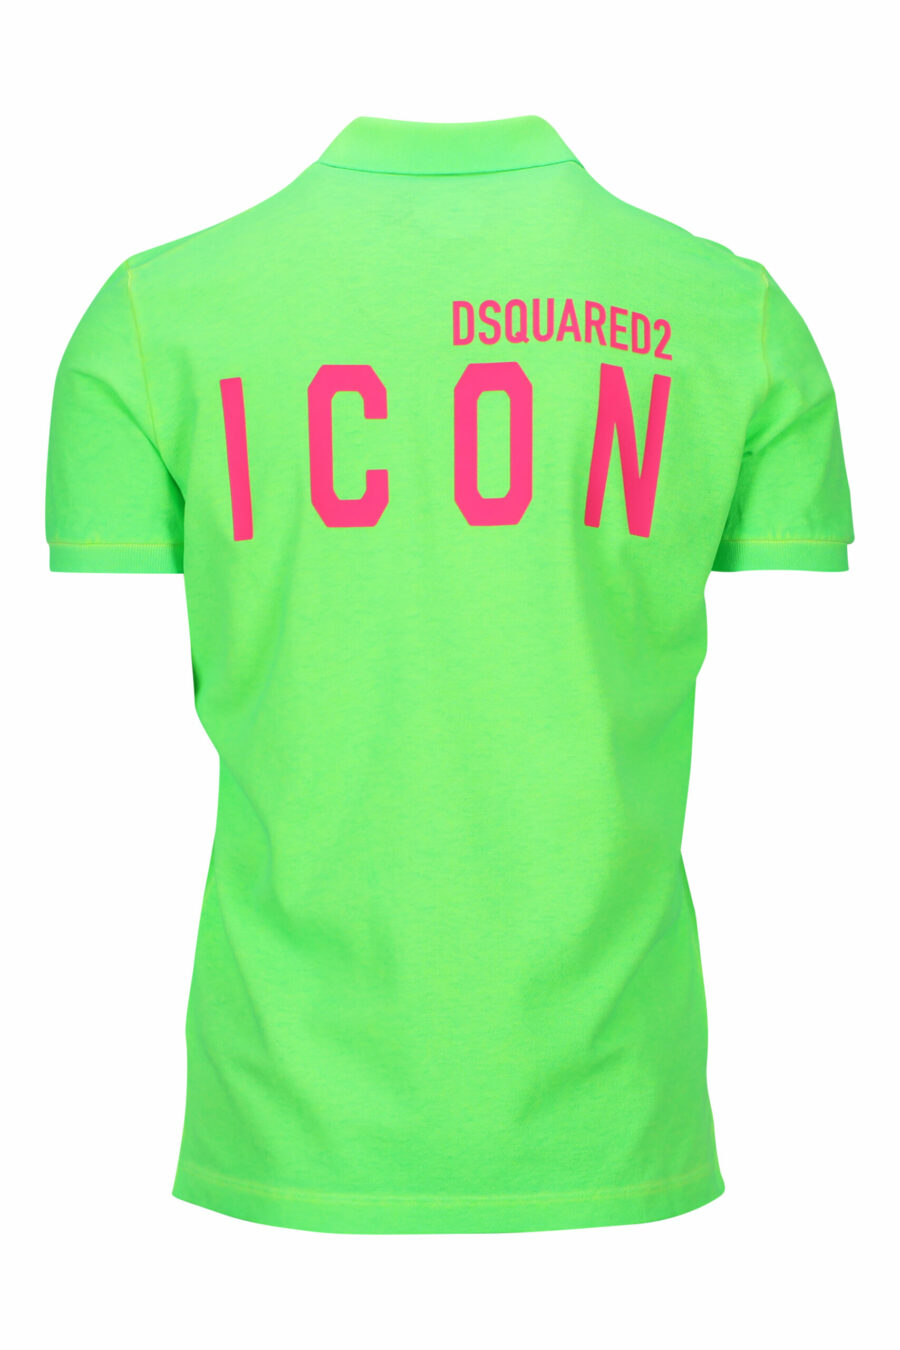 Neon green "tennis fit" polo shirt with "icon" logo on the back - 8054148400781 1 scaled